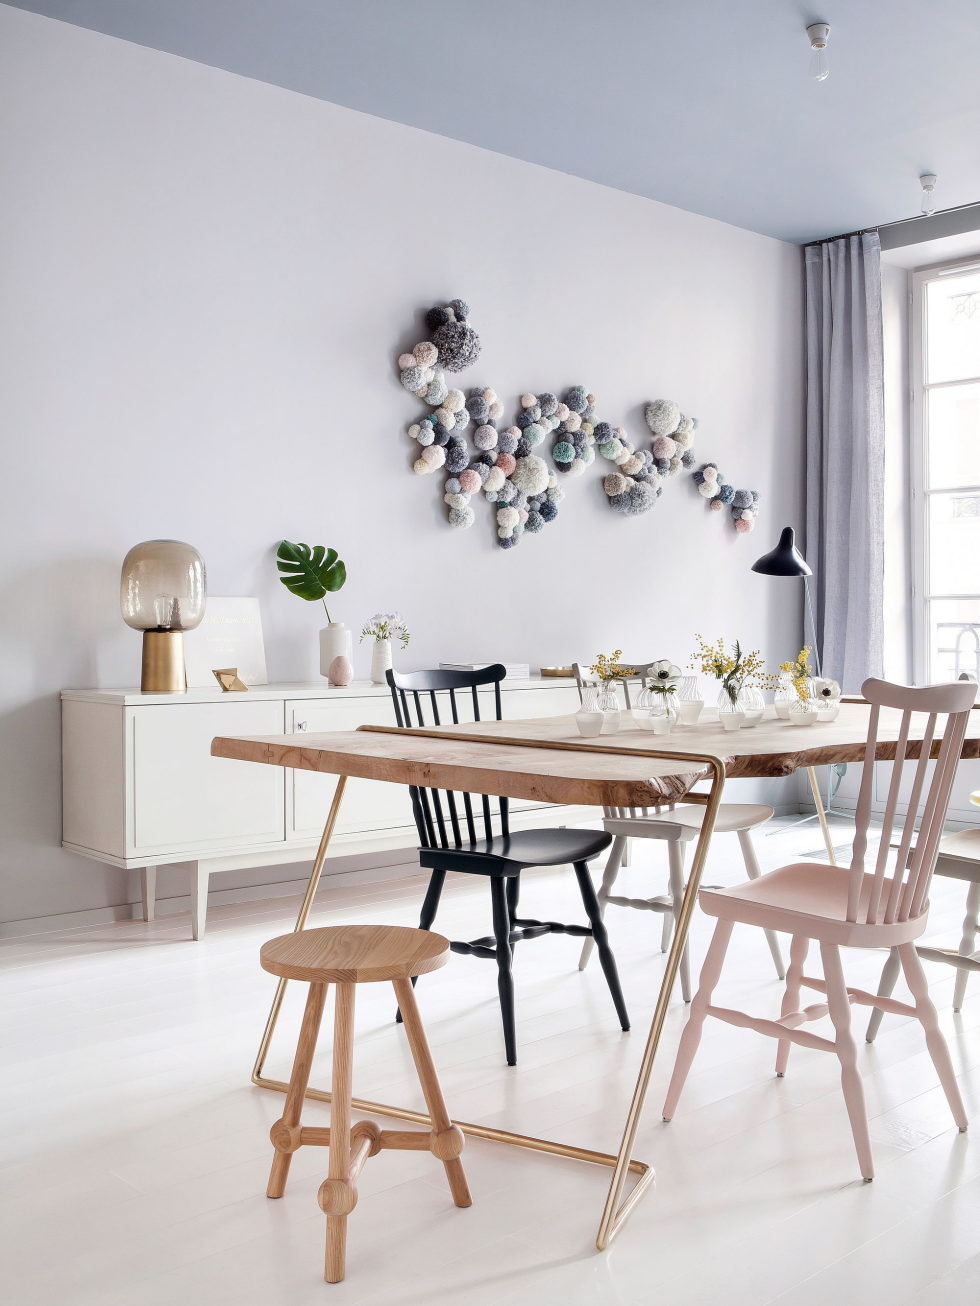 chez-marie-sixtine-the-apartment-for-guests-in-marie-sixtine-store-2